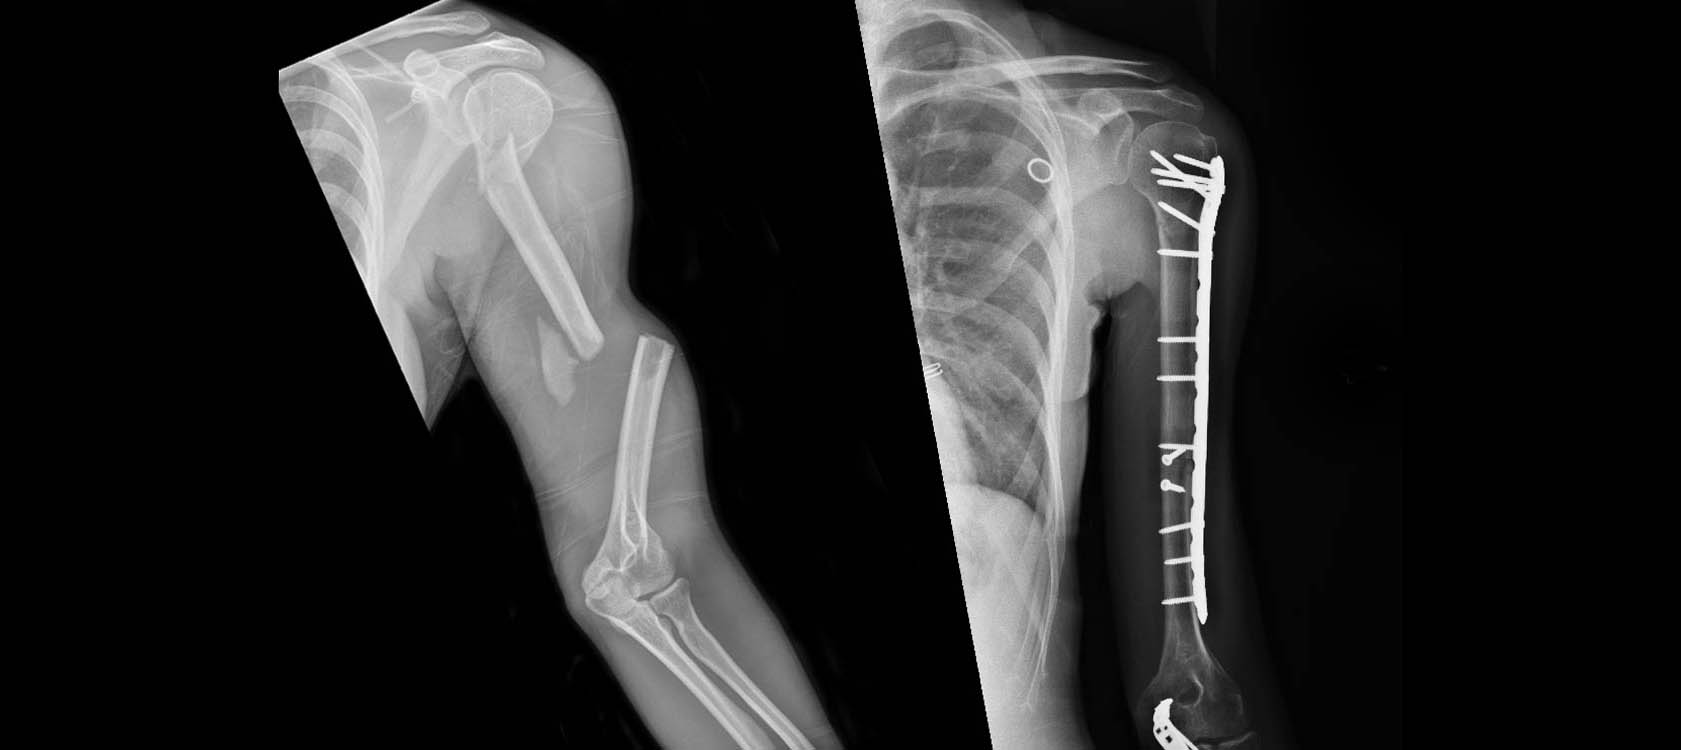 Beth Hufner's X-rays, before and after surgery performed by Grant Garrigues, MD